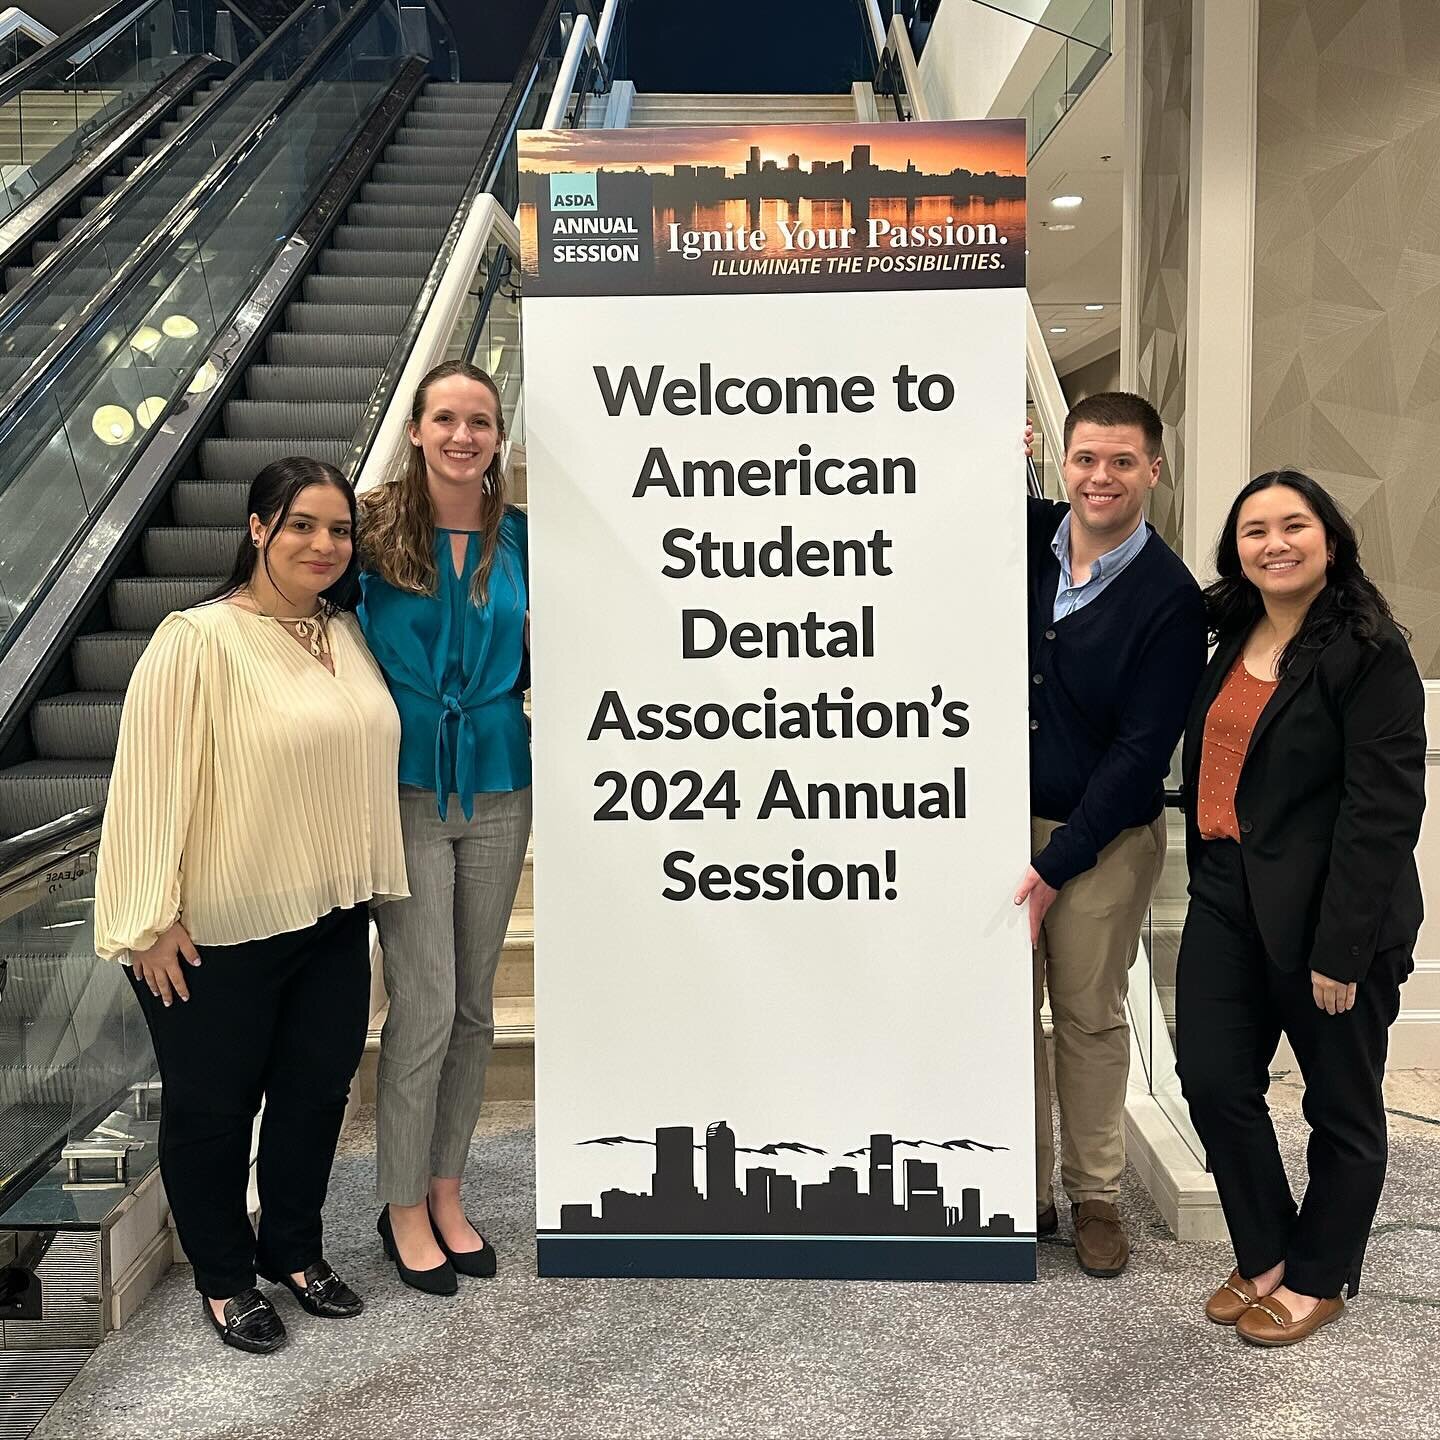 ✨ASDA Annual Session in Denver ✨

Roseman ASDA sent delegates to Denver where they represented the school on a national level during debates on resolutions involving licensure, governance, mental health initiatives, and more!

#dentalstudents #asda #